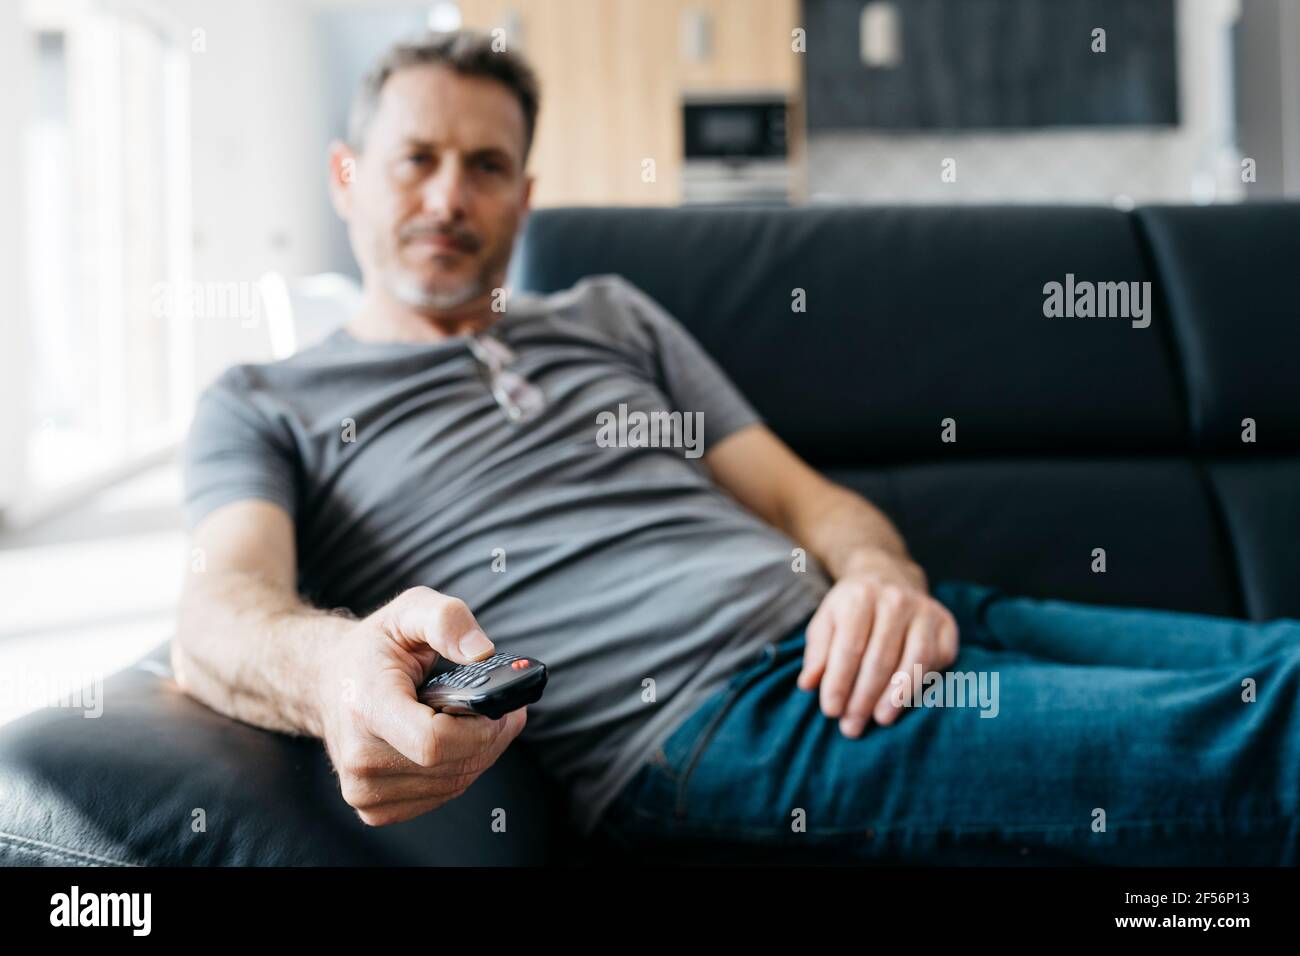 Mature man changing channels through remote control on sofa in living room Stock Photo